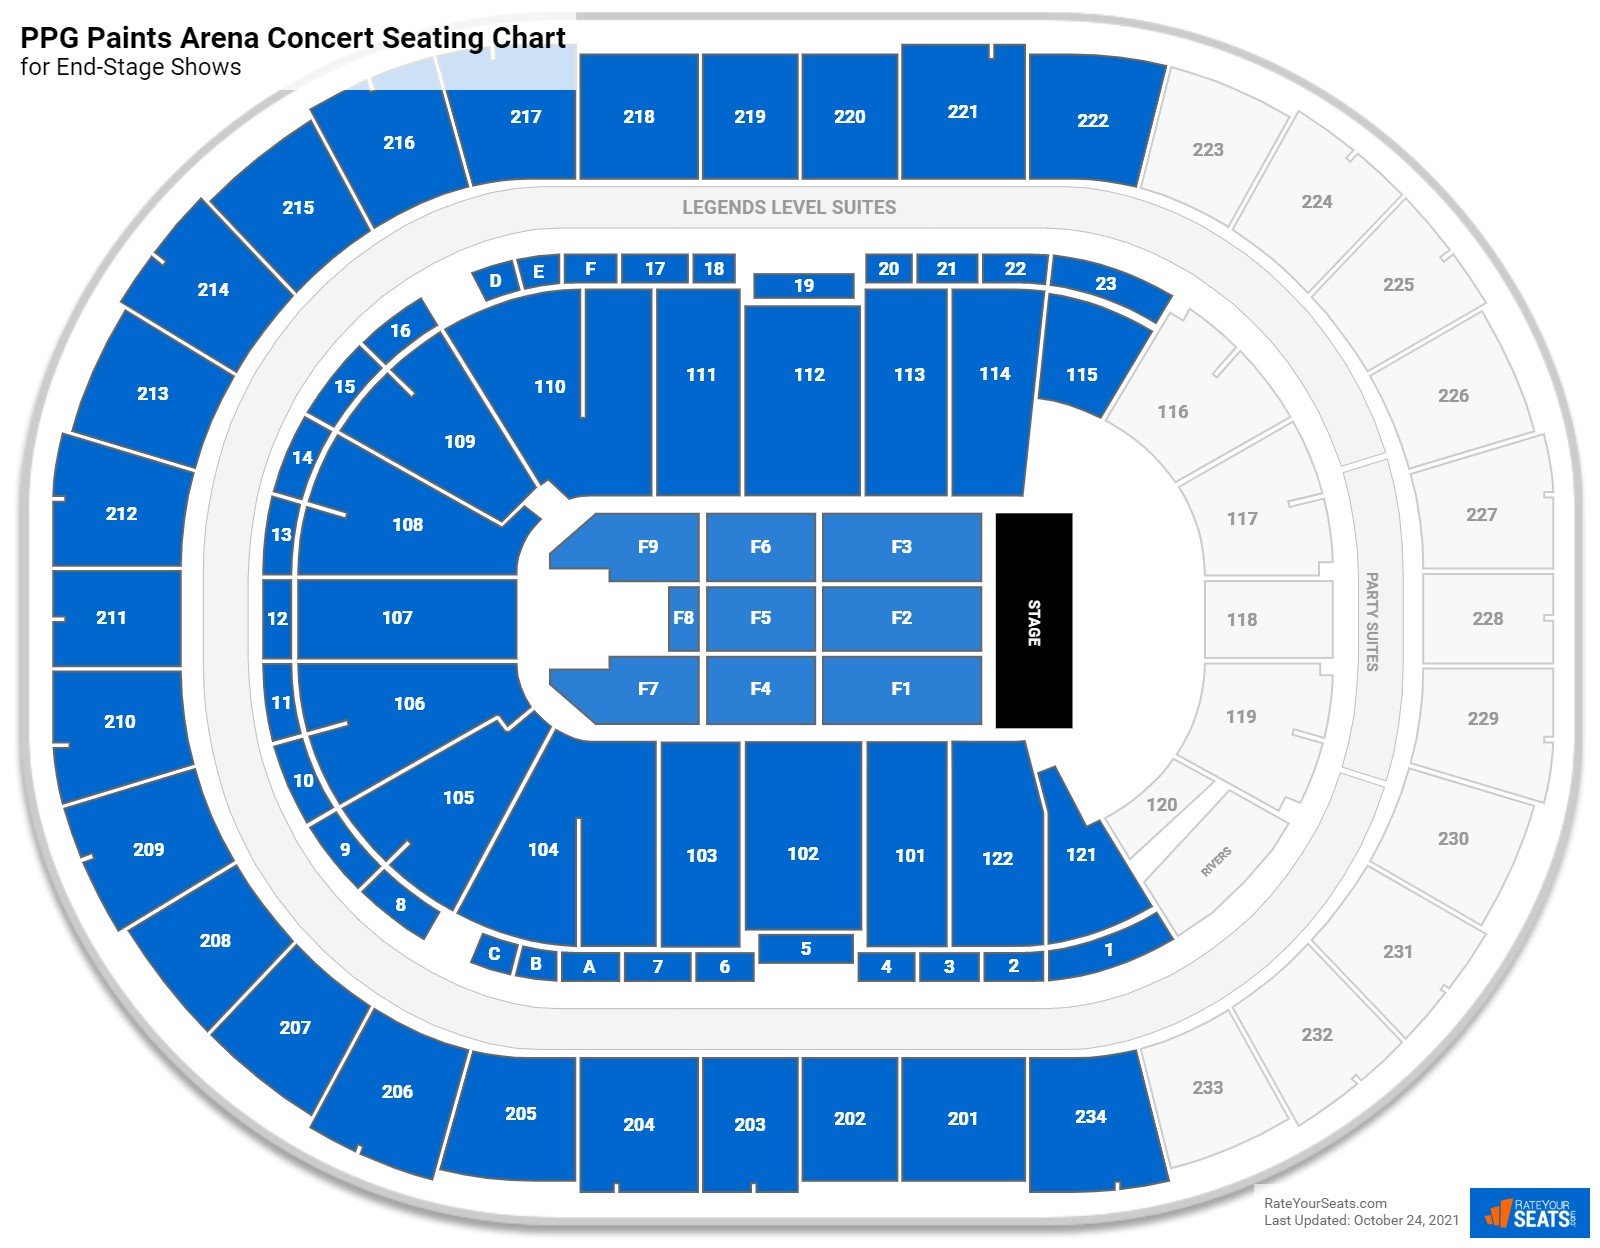 PPG Paints Arena Tickets, Seating Charts and Schedule in